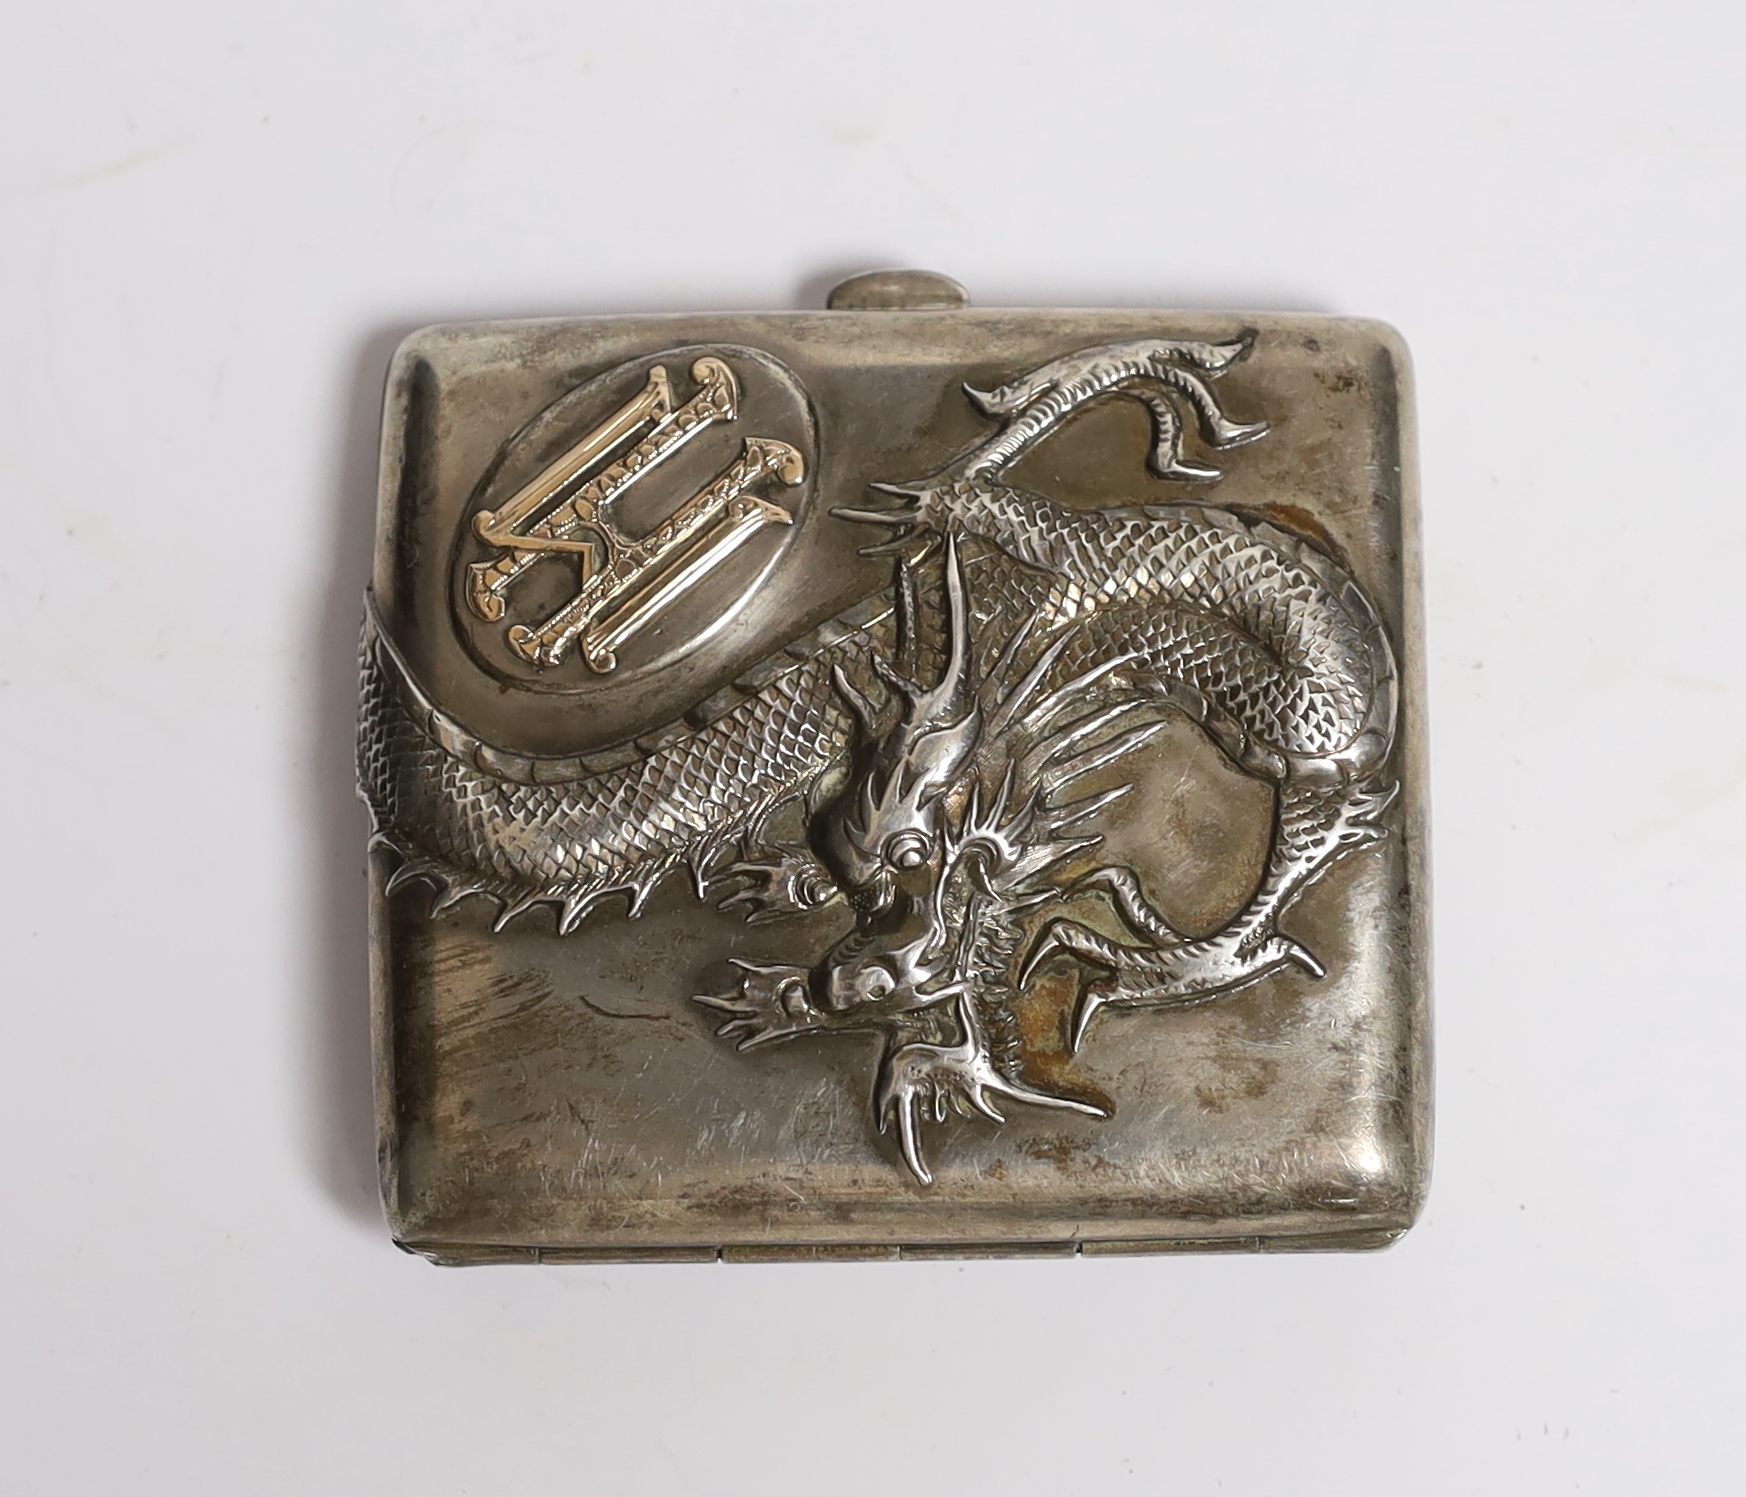 A late 19th/early 20th century Chinese Export white metal cigarette case, by Tuck Chang?, with yellow metal monogram applique and embossed with a dragon, 78mm.